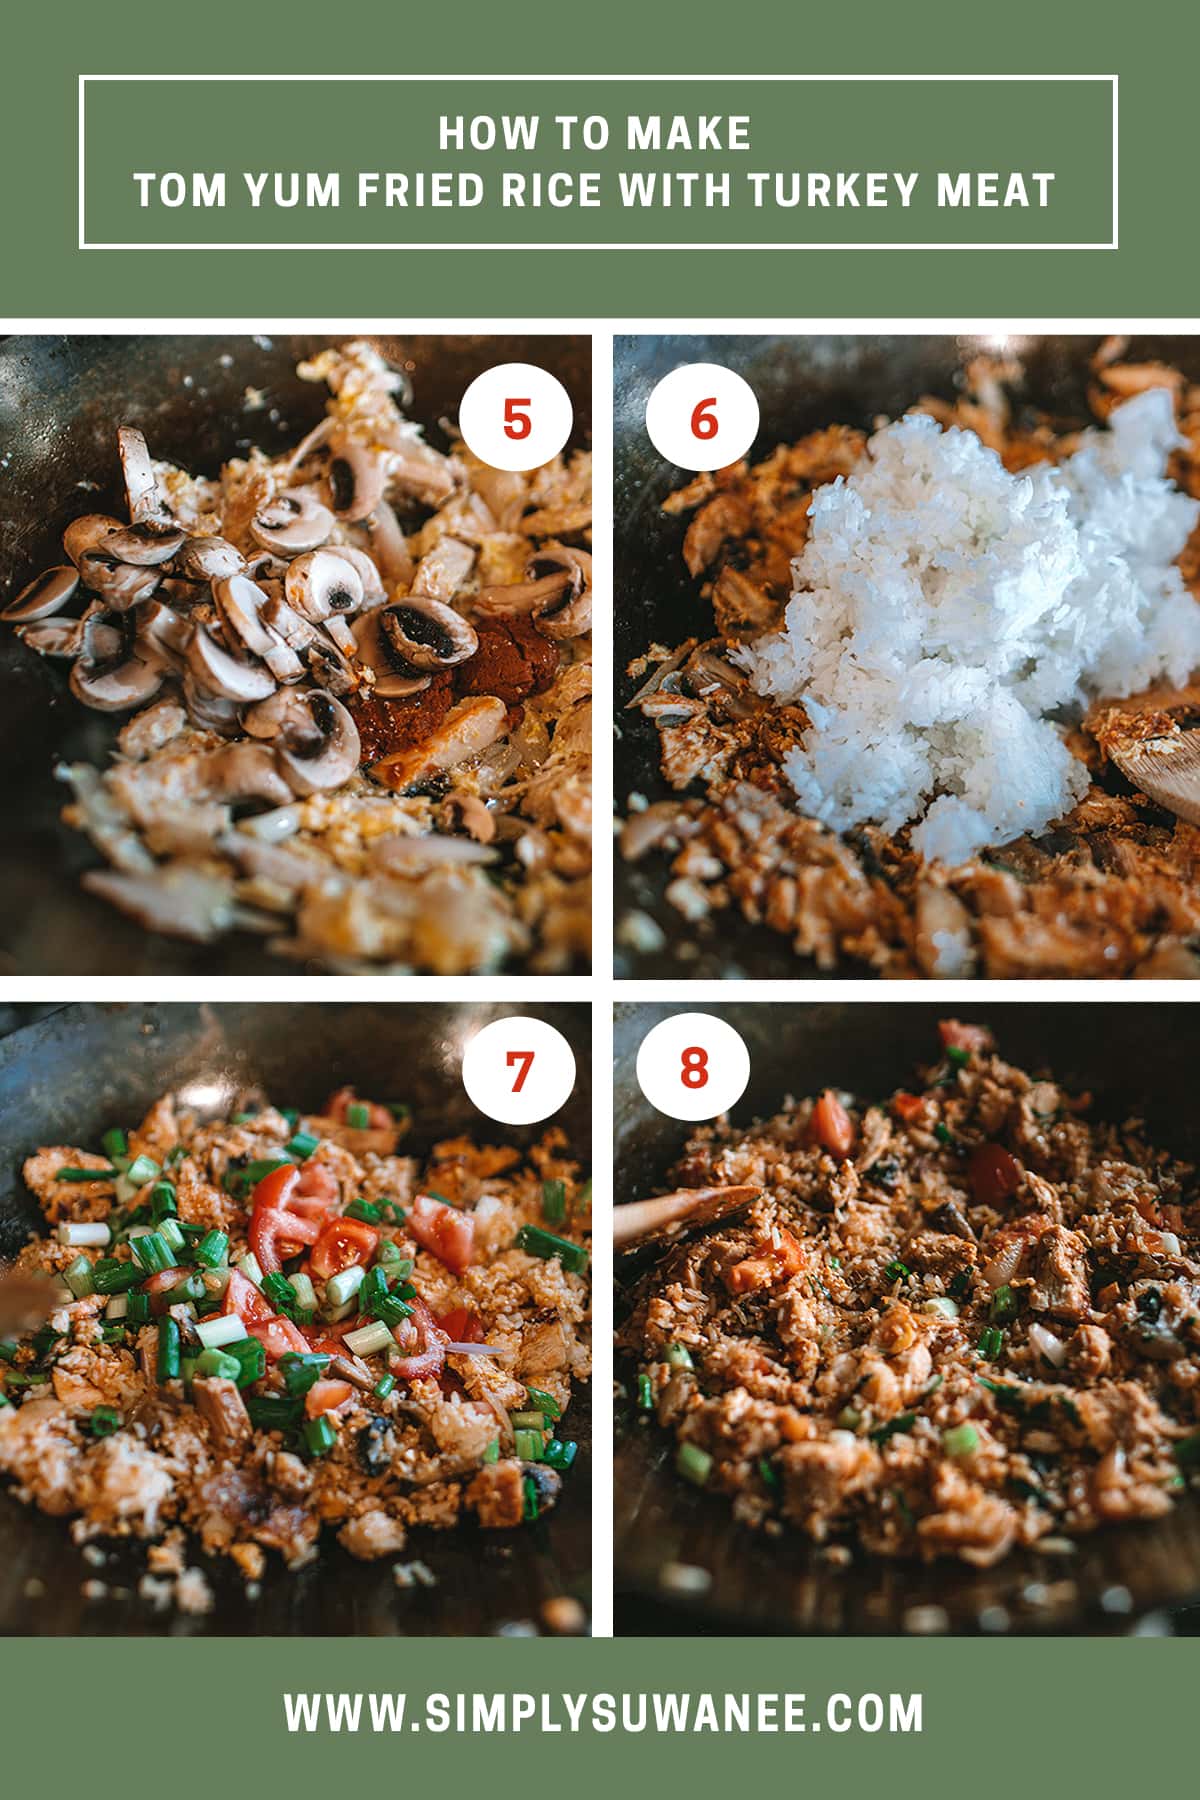 Steps 5-8 photos of how to make Tom Yum fried rice.